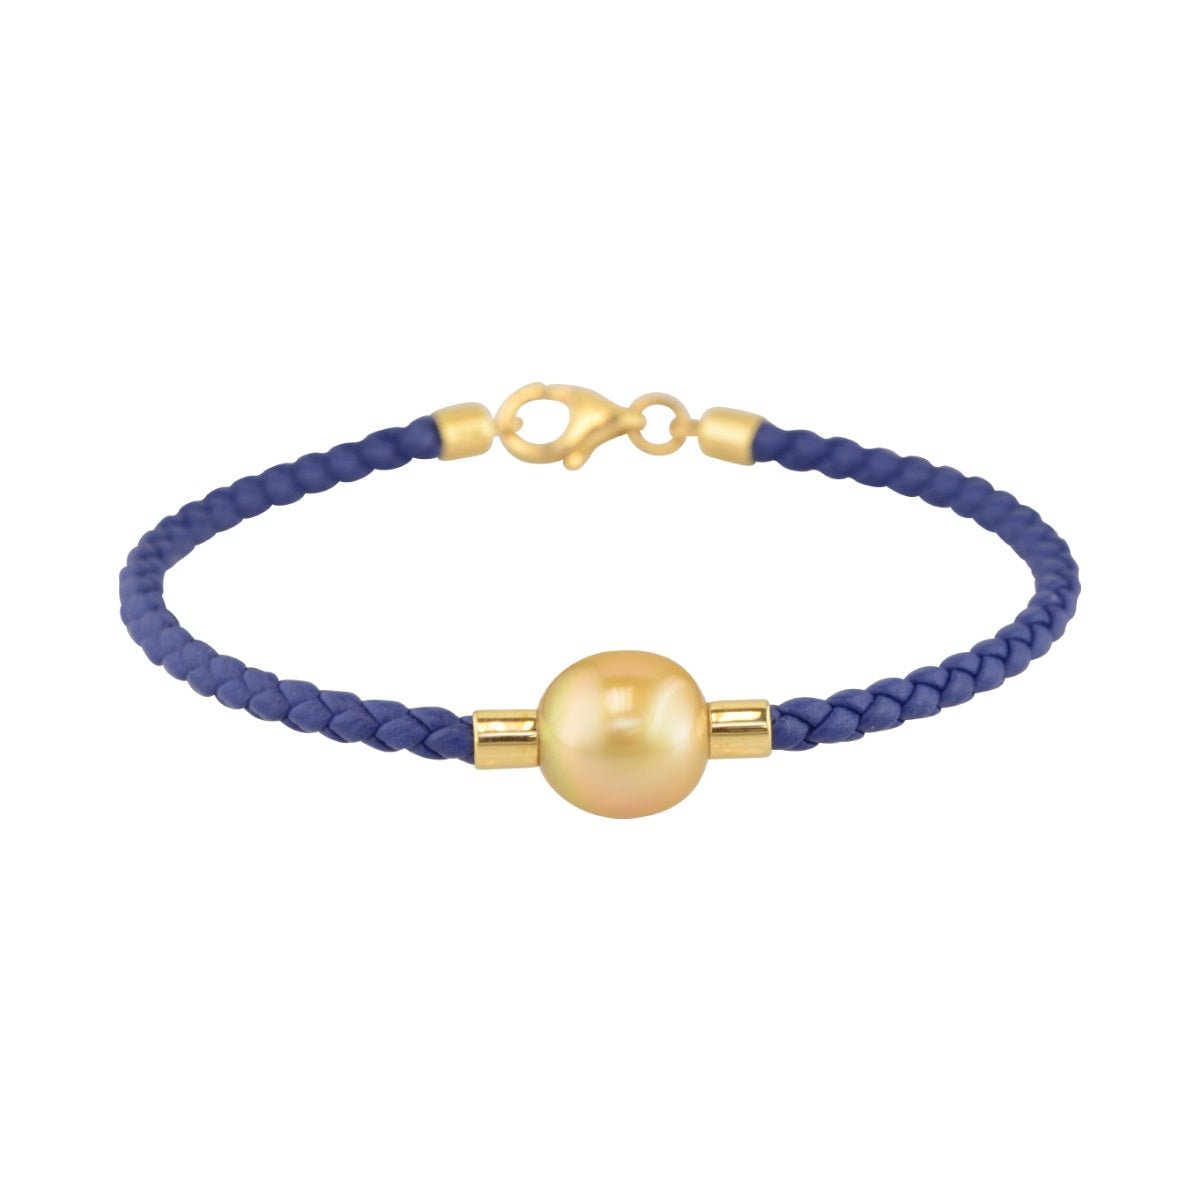 Golden Pearl and Leather Bracelet